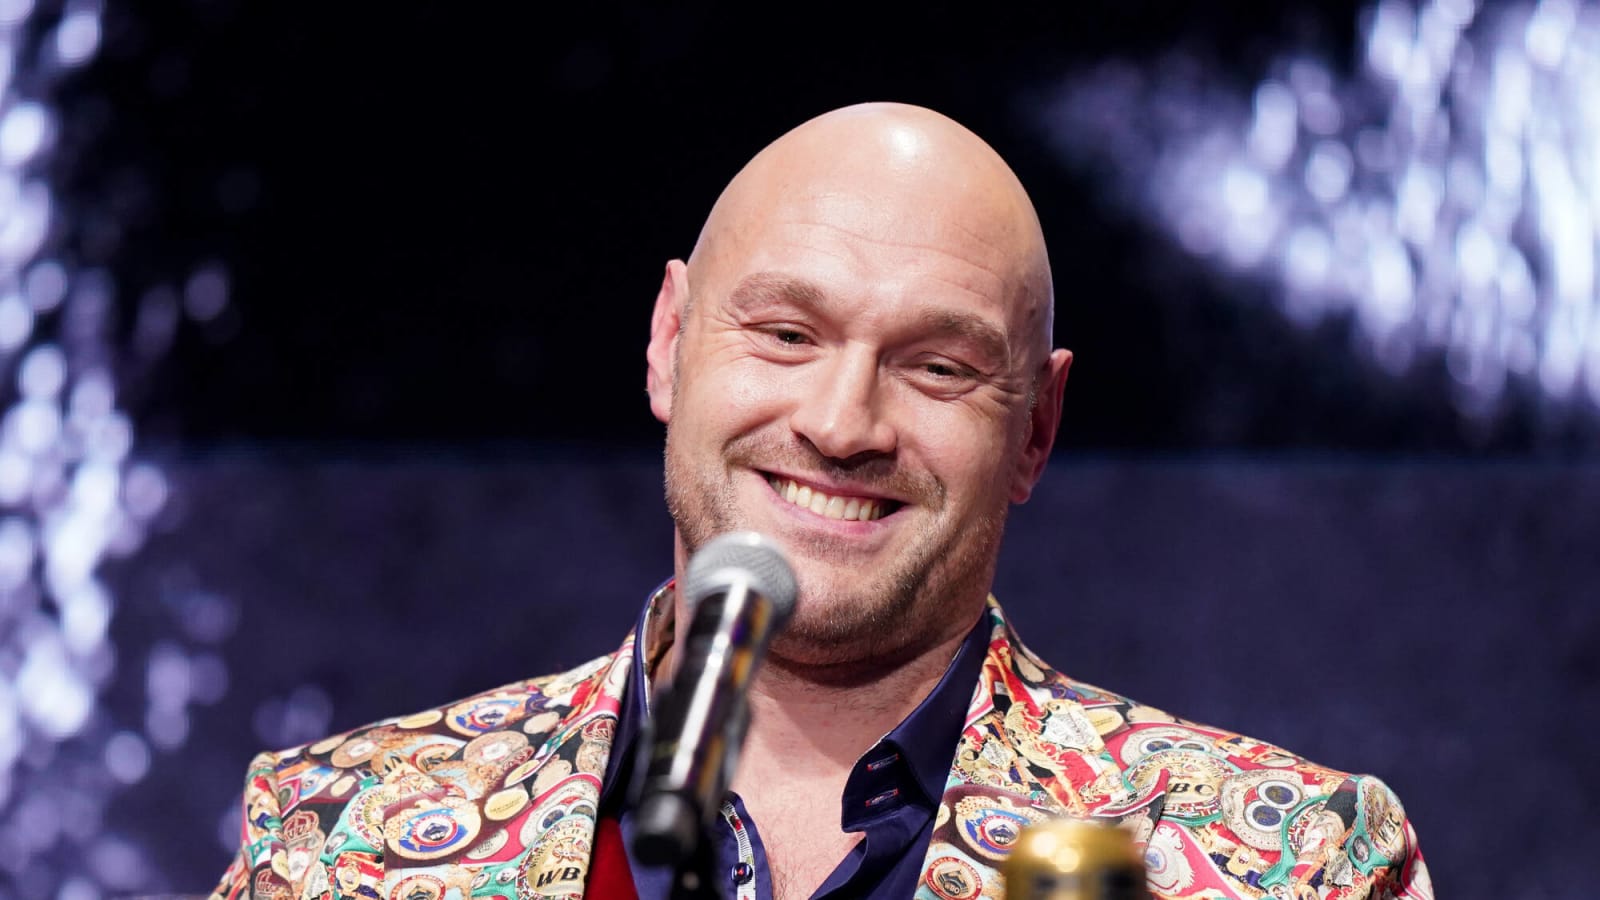 Tyson Fury Reminisces on Past Glory and Names the Greatest Heavyweight Fight of All Time